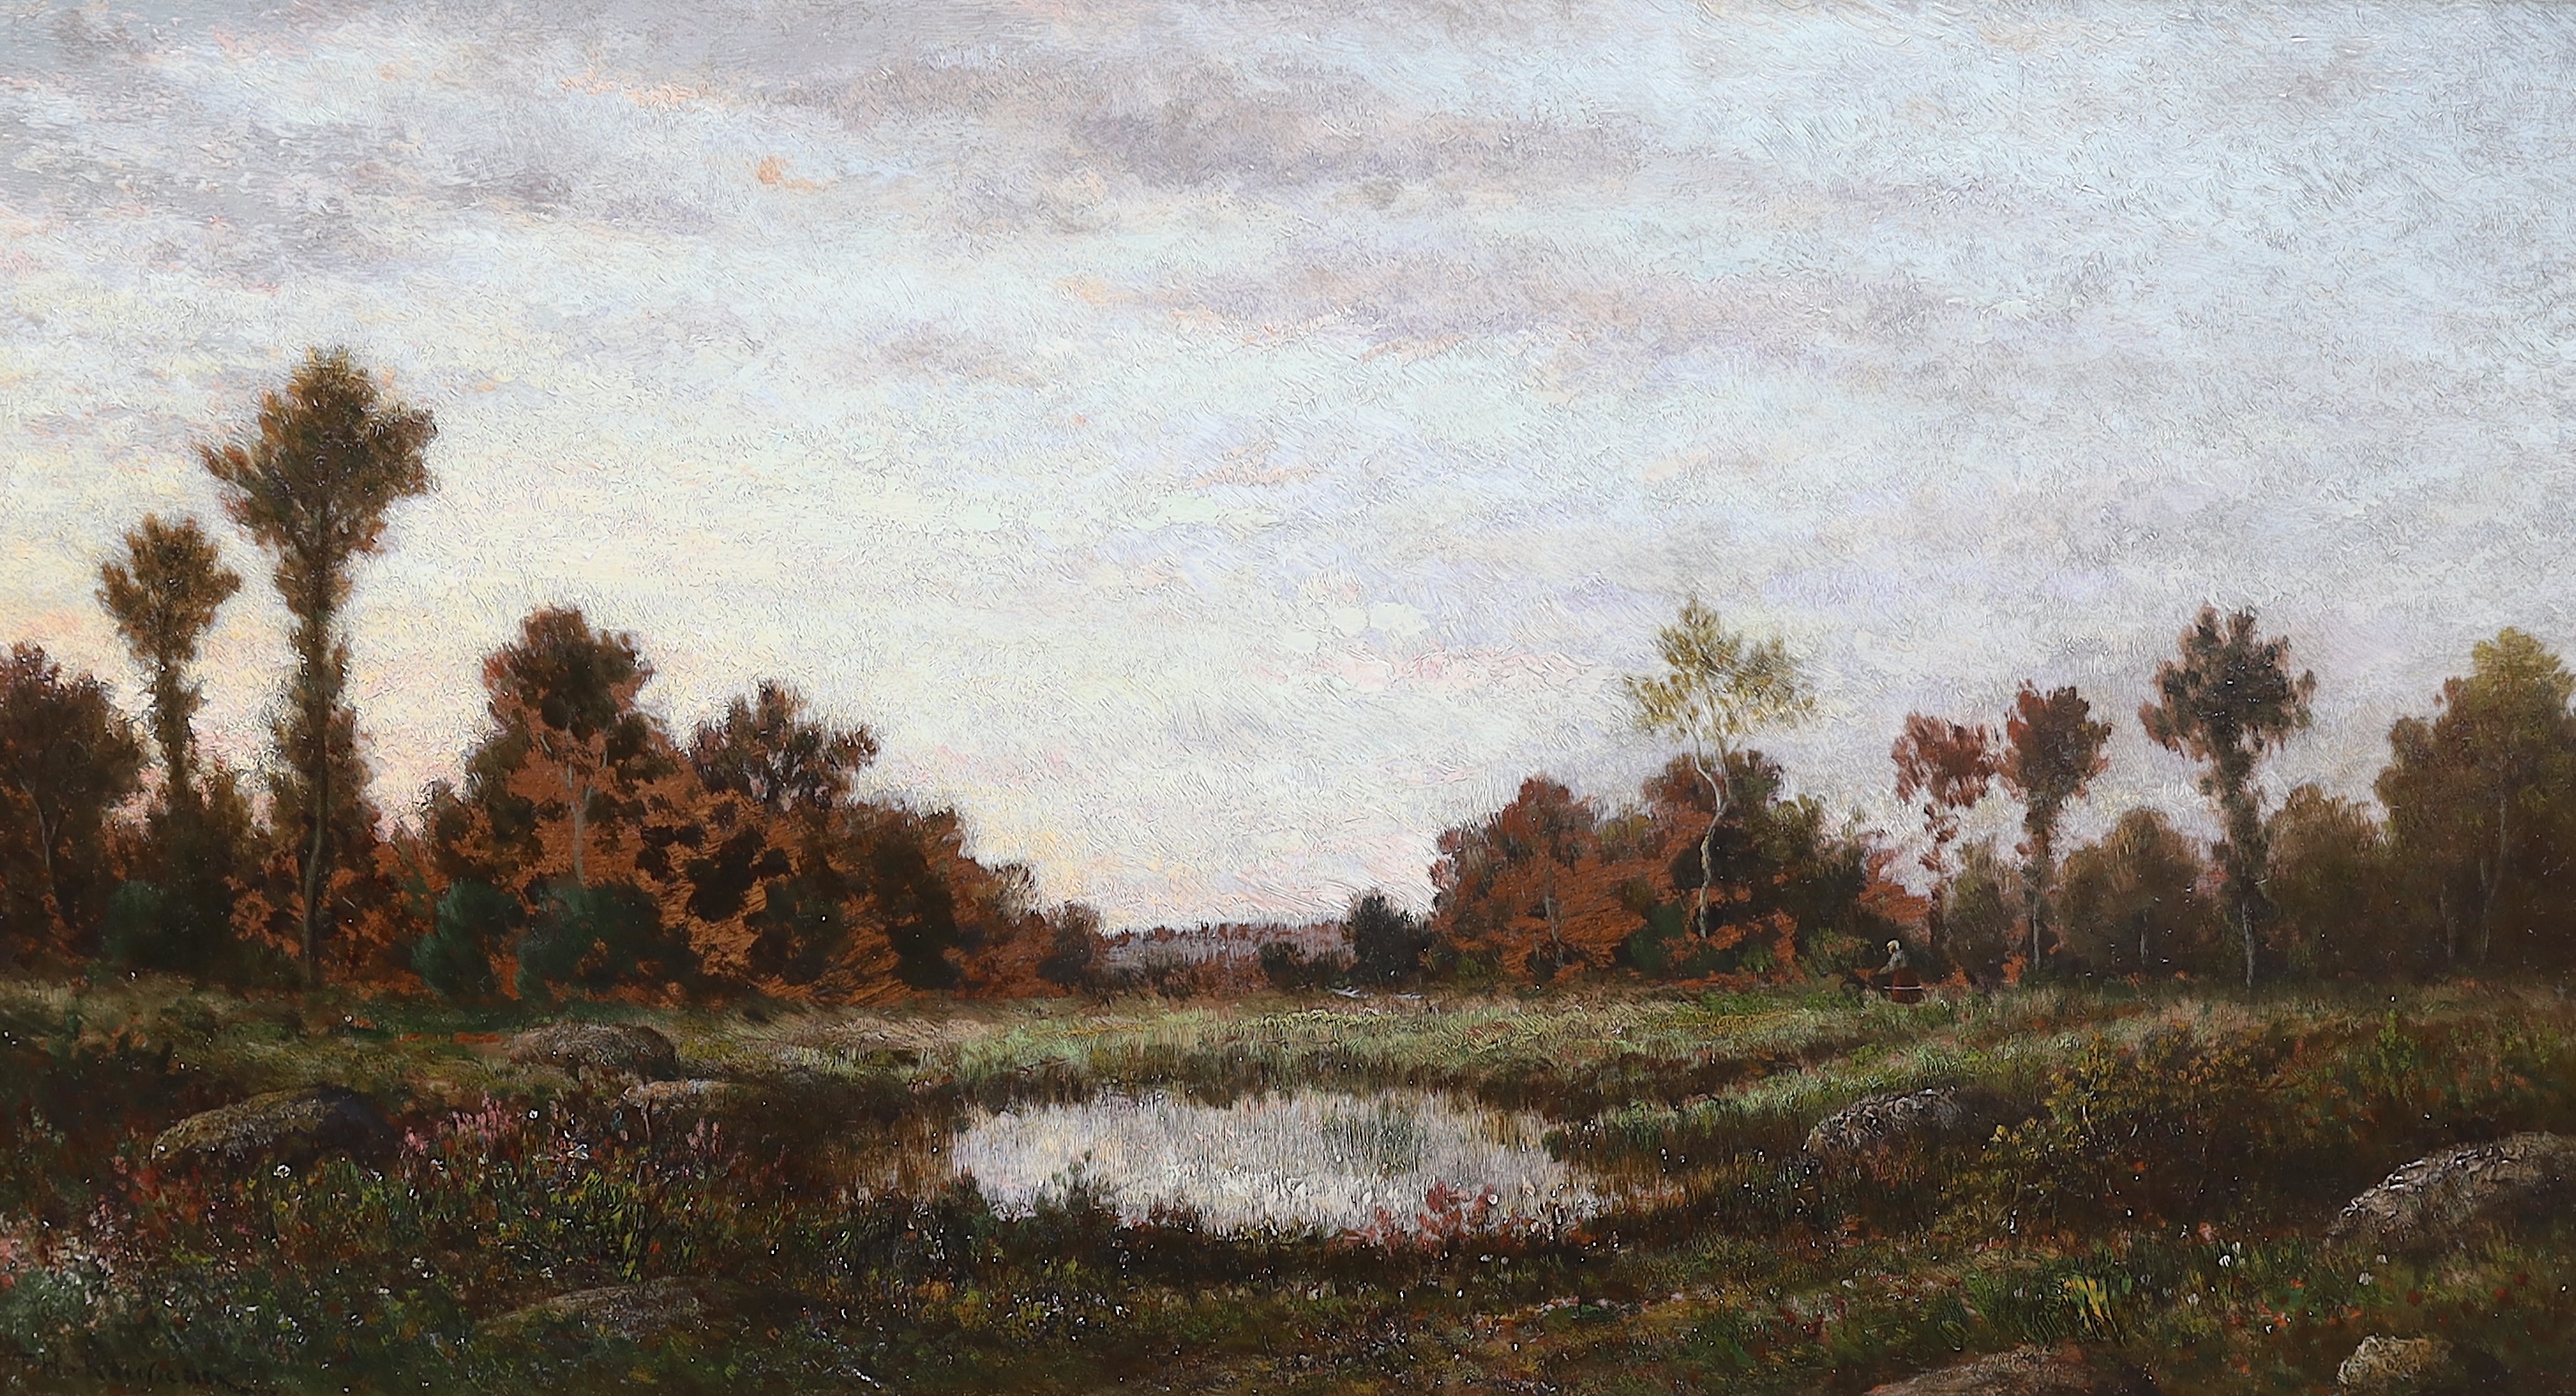 Theodore Rousseau (French, 1812-1867), Paysage à la Mare c.1845-50, oil on wooden panel, 23 x 43cm